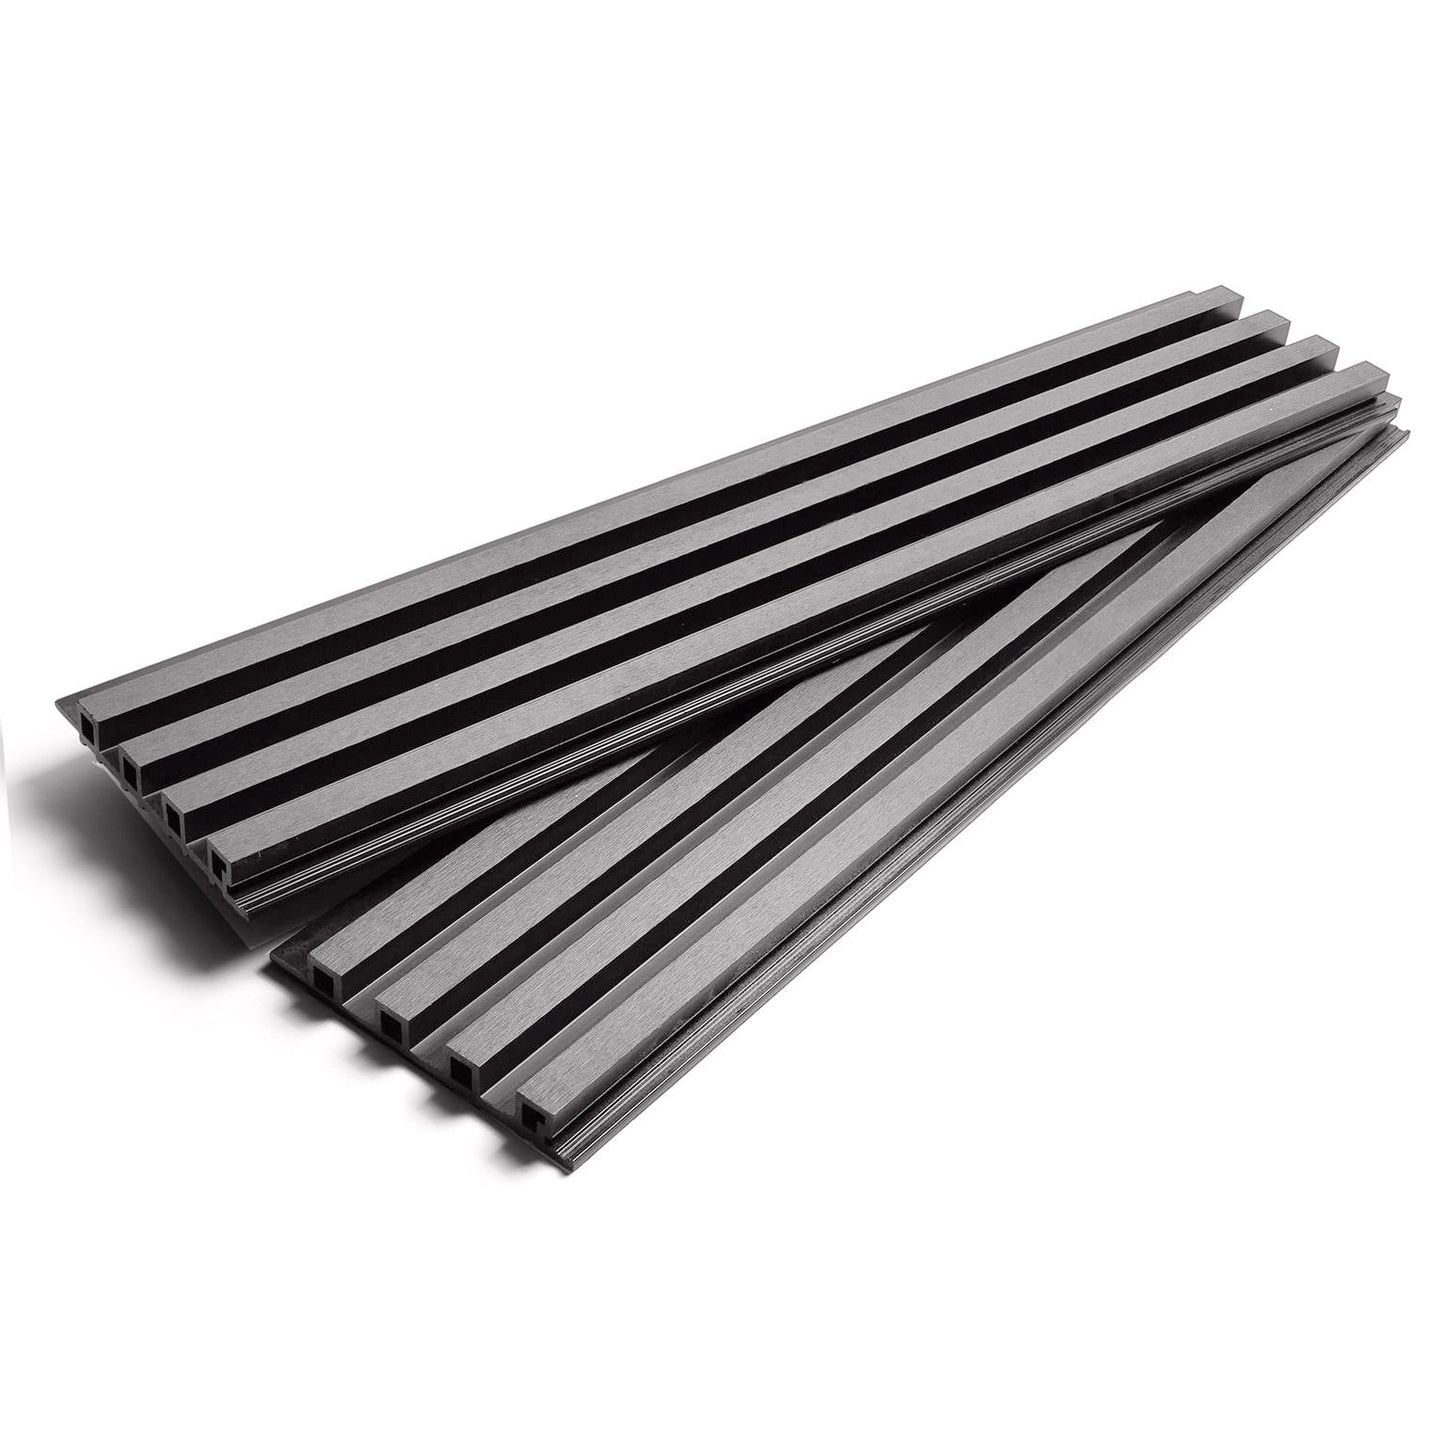 EasyComposite™ WPC Exterior Wall Slatted Cladding Boards